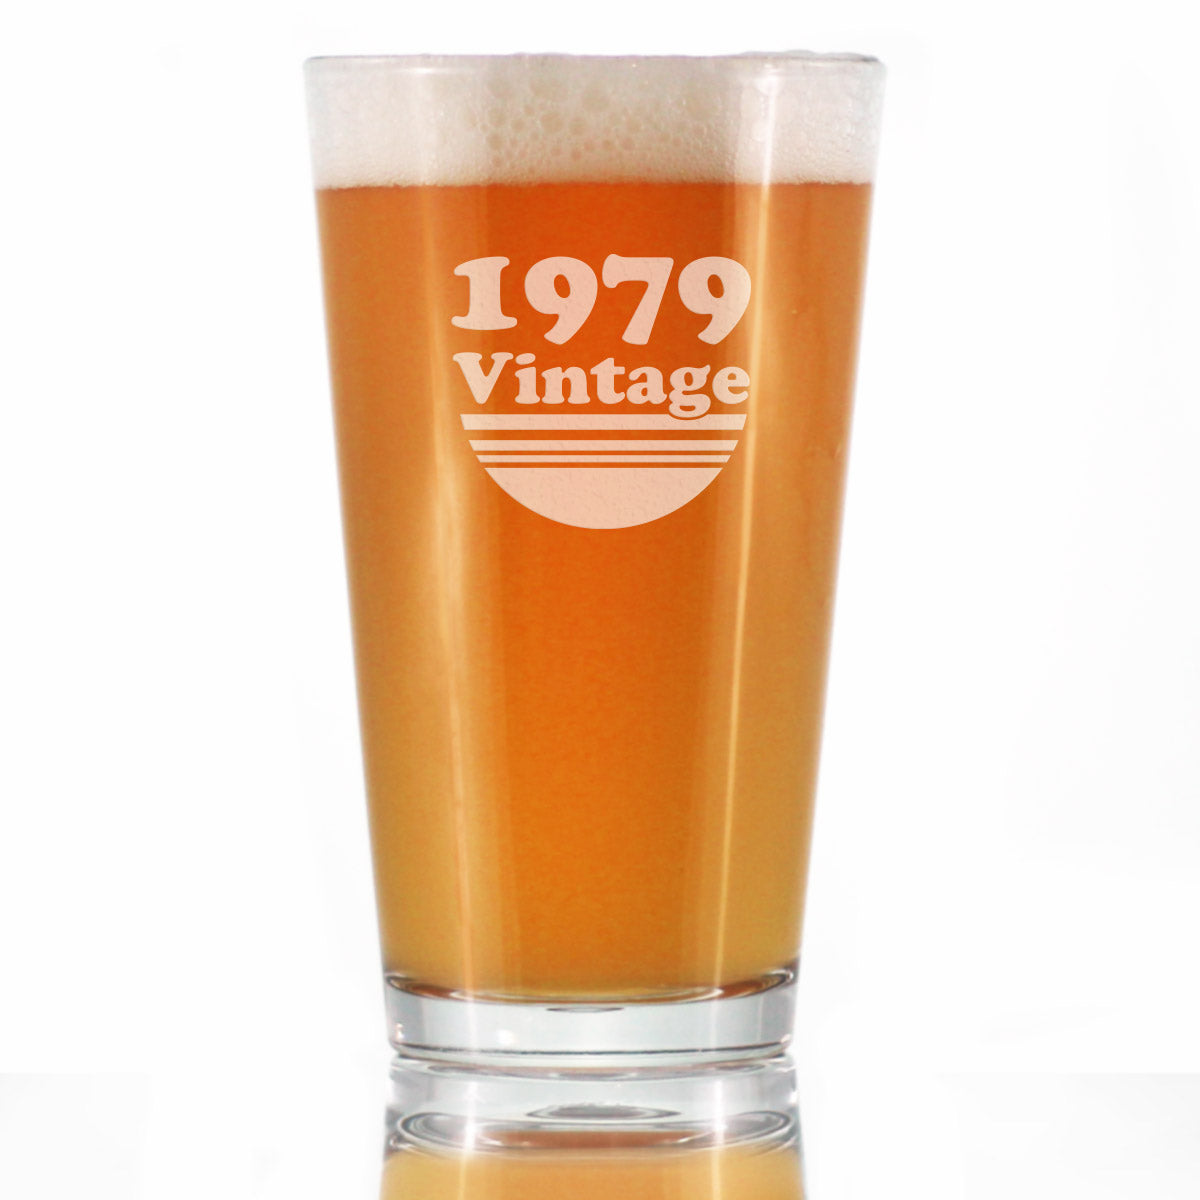 Vintage 1979 - Pint Glass for Beer - 45th Birthday Gifts for Men or Women Turning 45 - Fun Bday Party Decor - 16 oz